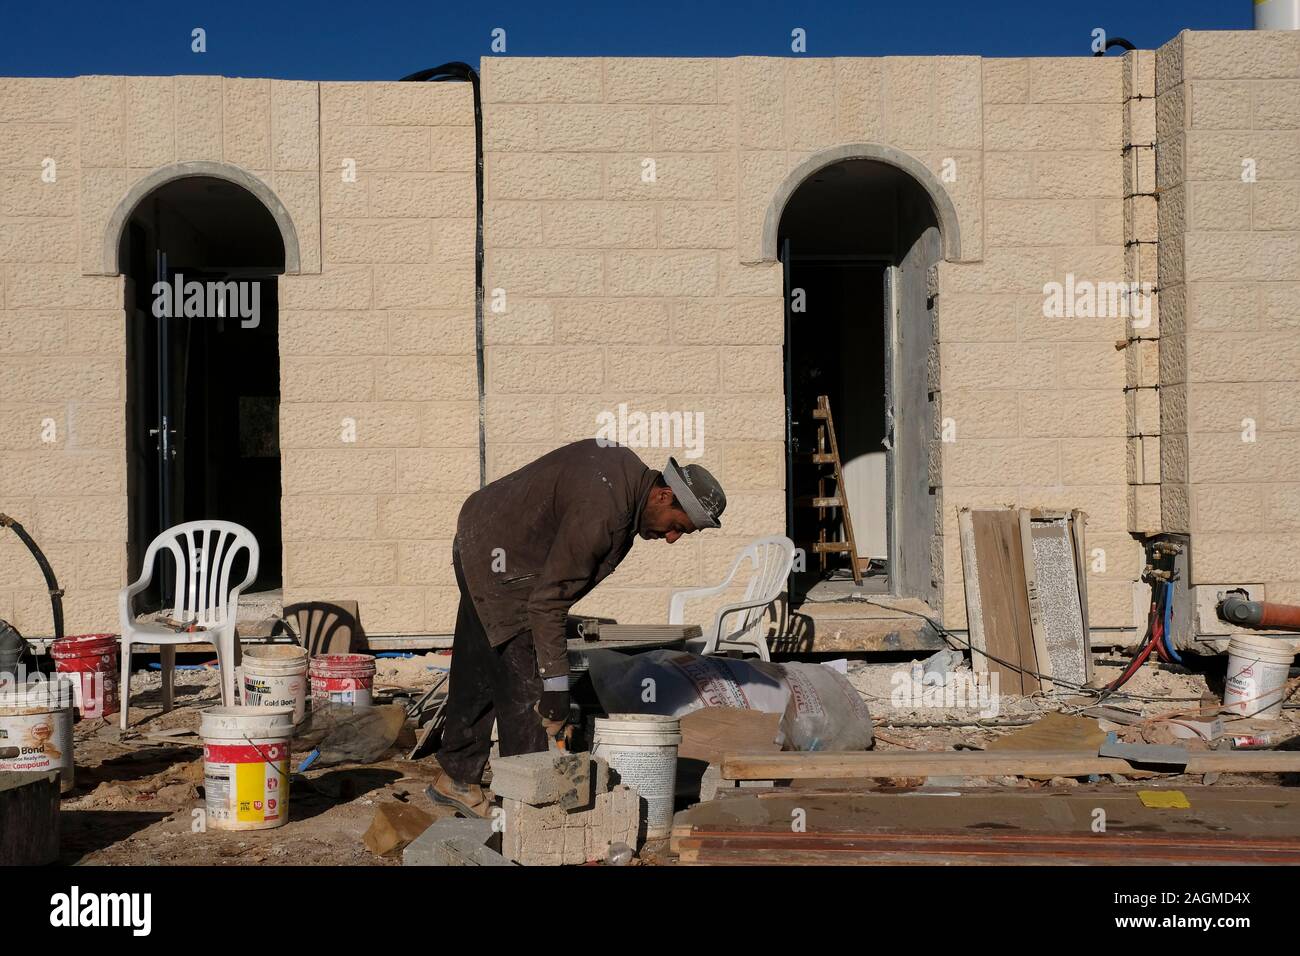 A Palestinian man works at a construction site in the Israeli settlement of Ofra in the West Bank Israel. Stock Photo